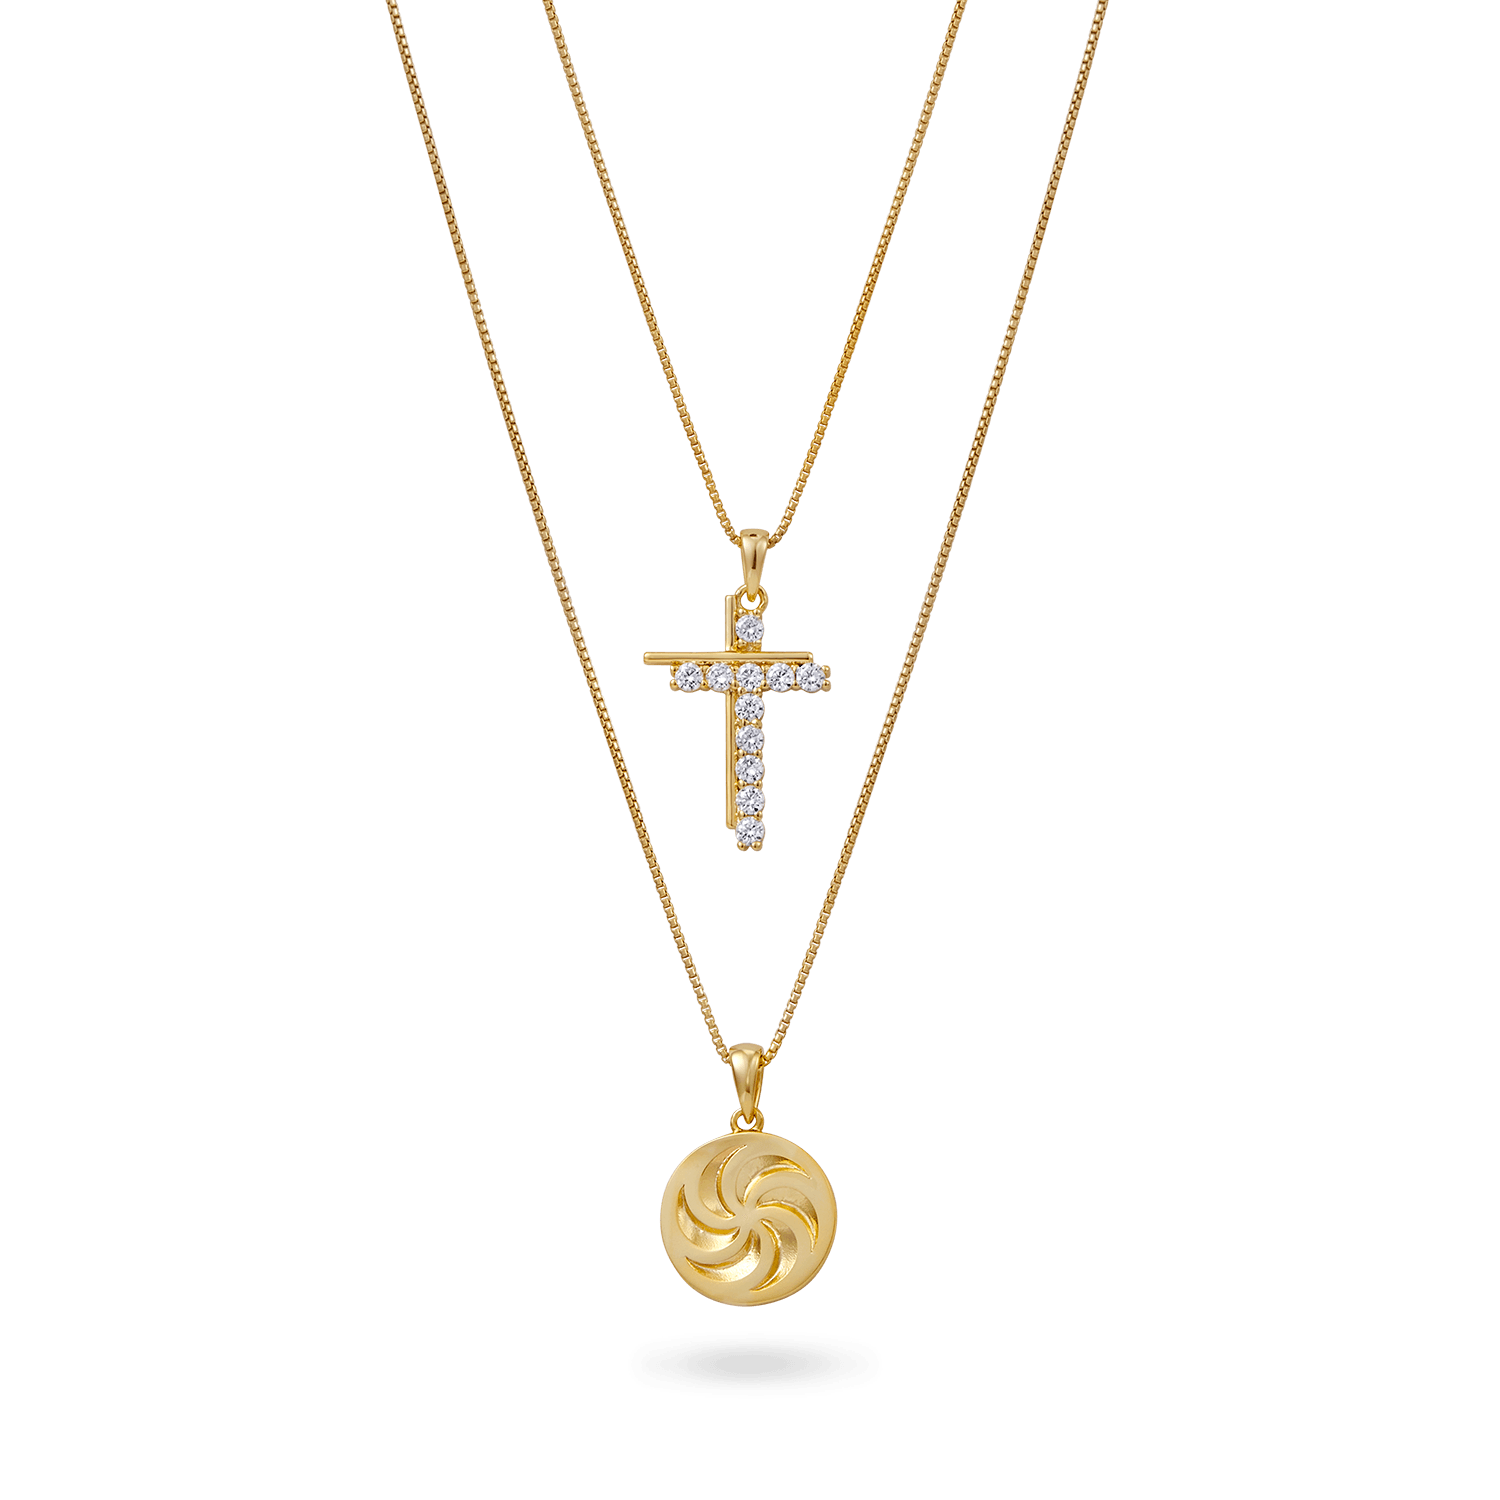 Eternal Faith Gift Set Necklaces IceLink-ATL 14K Gold Plated  